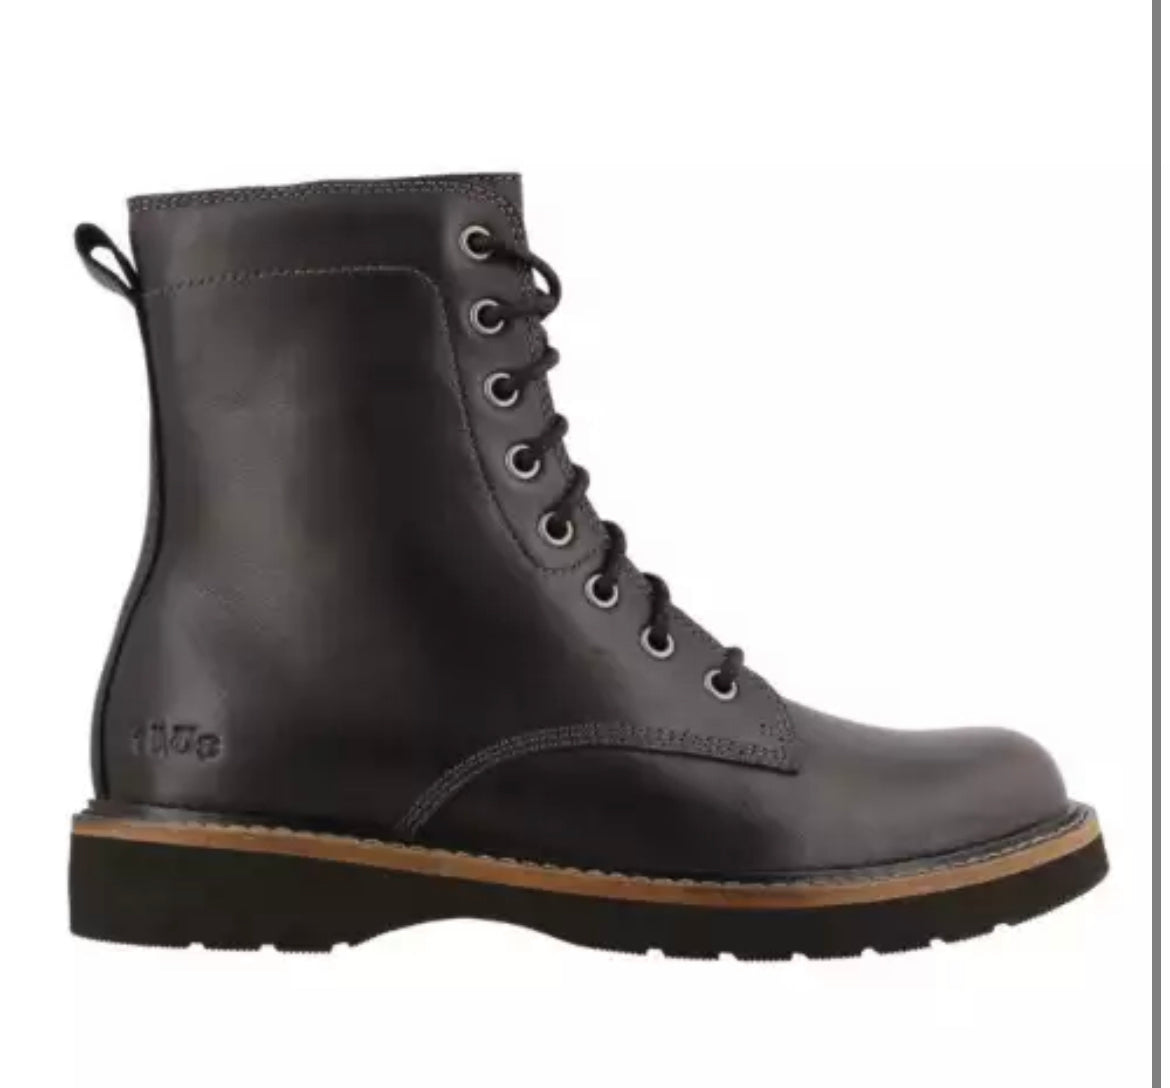 Taos Work It High Black Boot - All Mixed Up 